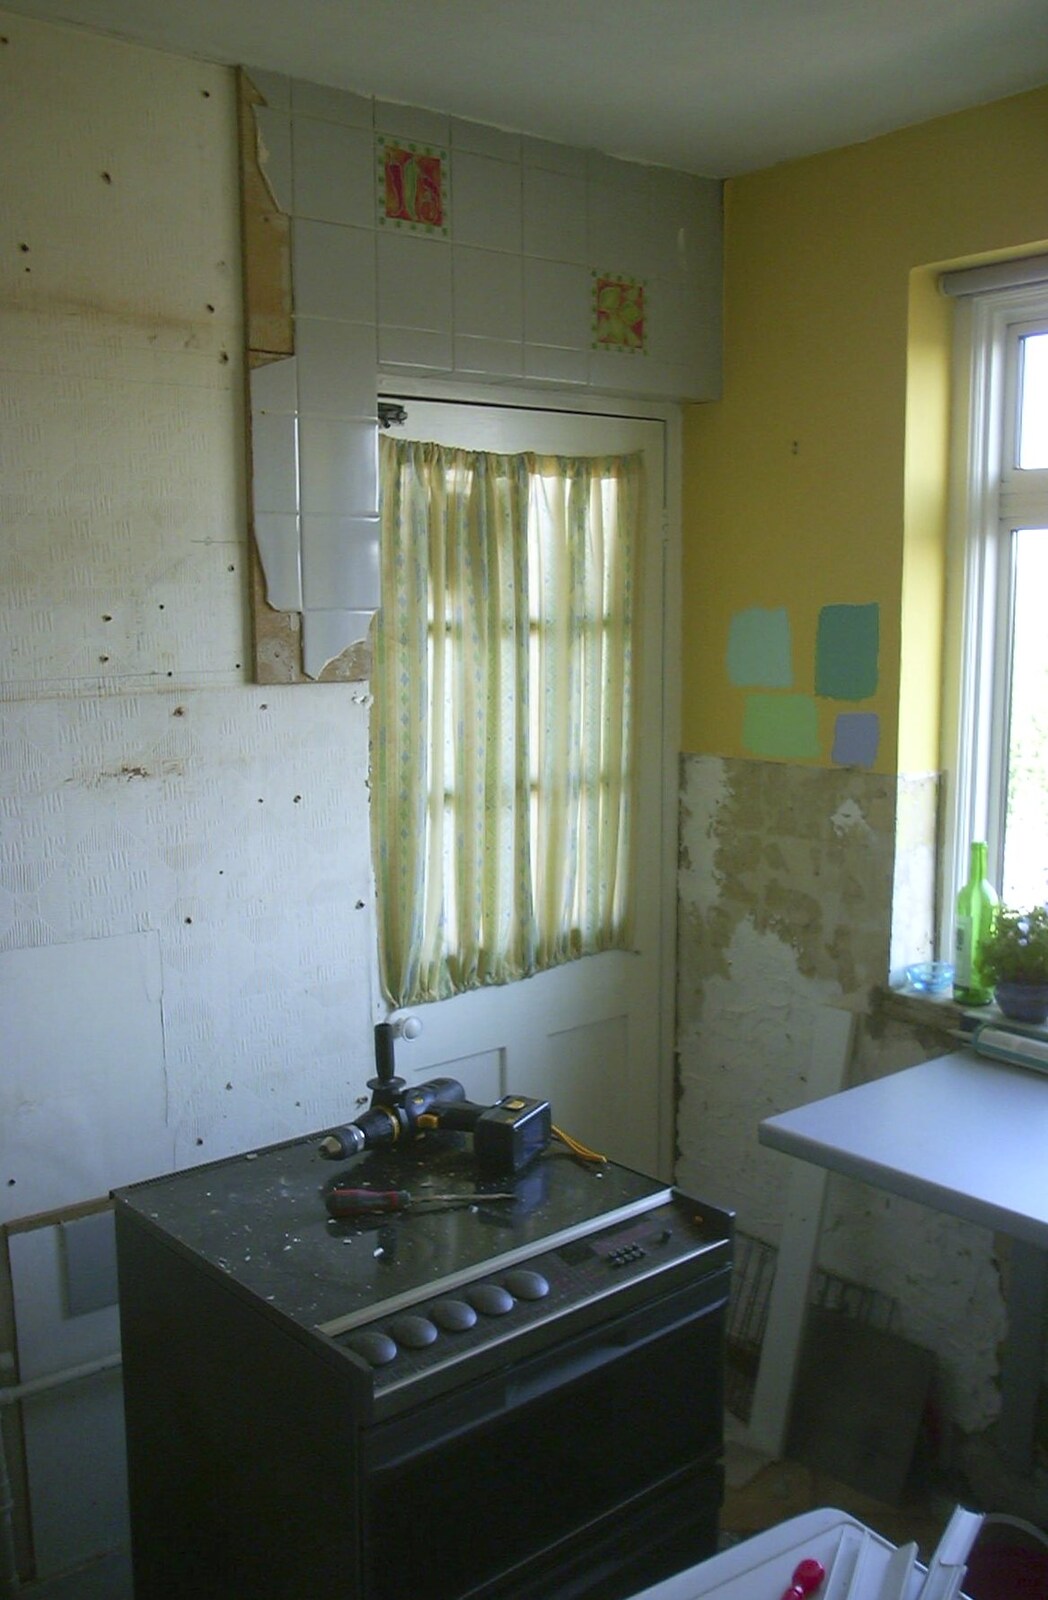 A cooker, and the door to the balcony from Sis's Kitchen, Morden, London - 15th November 2001